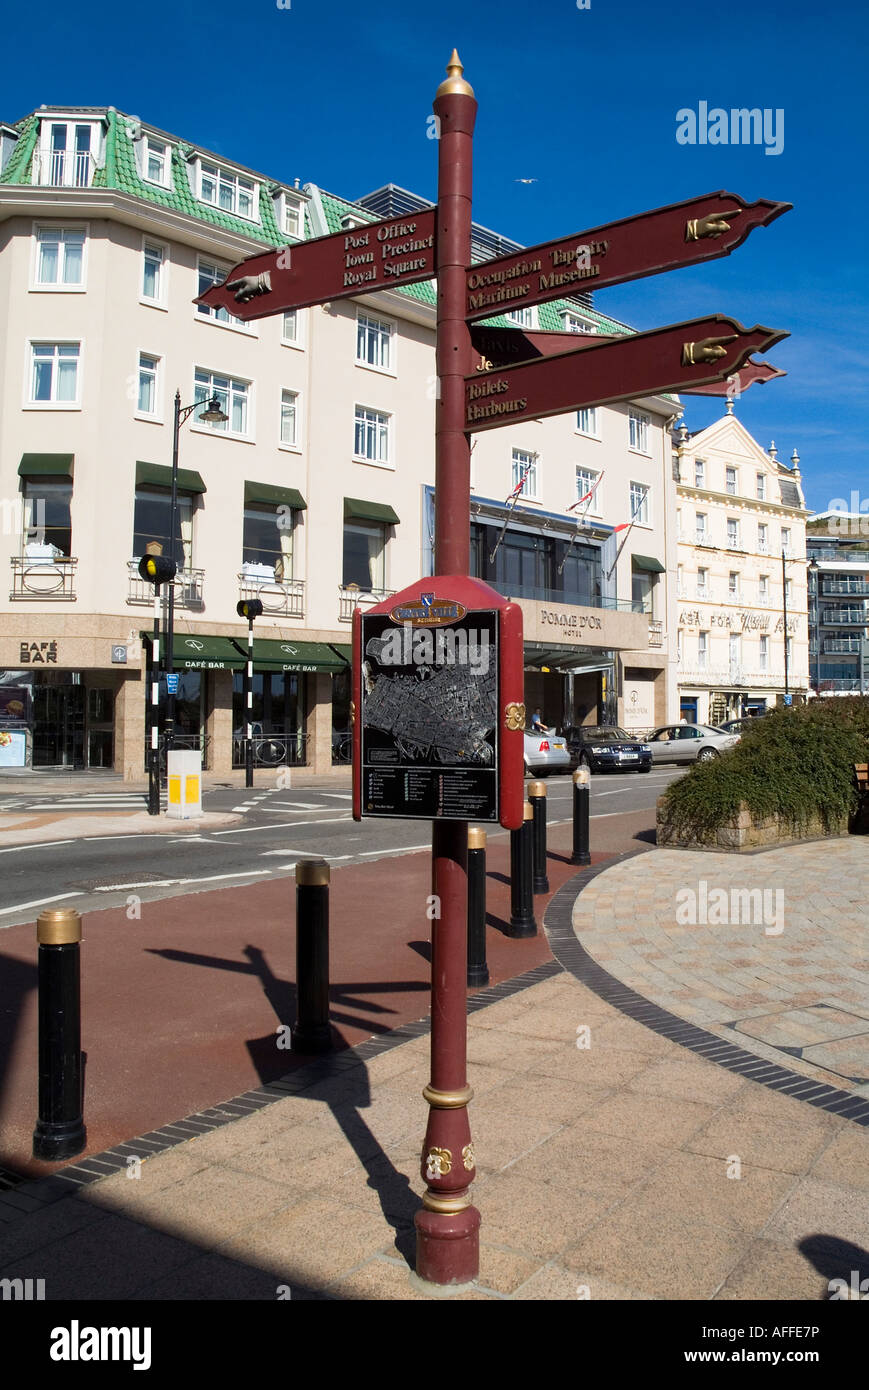 dh Tourist information signpost ST HELIER JERSEY And town map showing directions to attractions sign post arrow Stock Photo